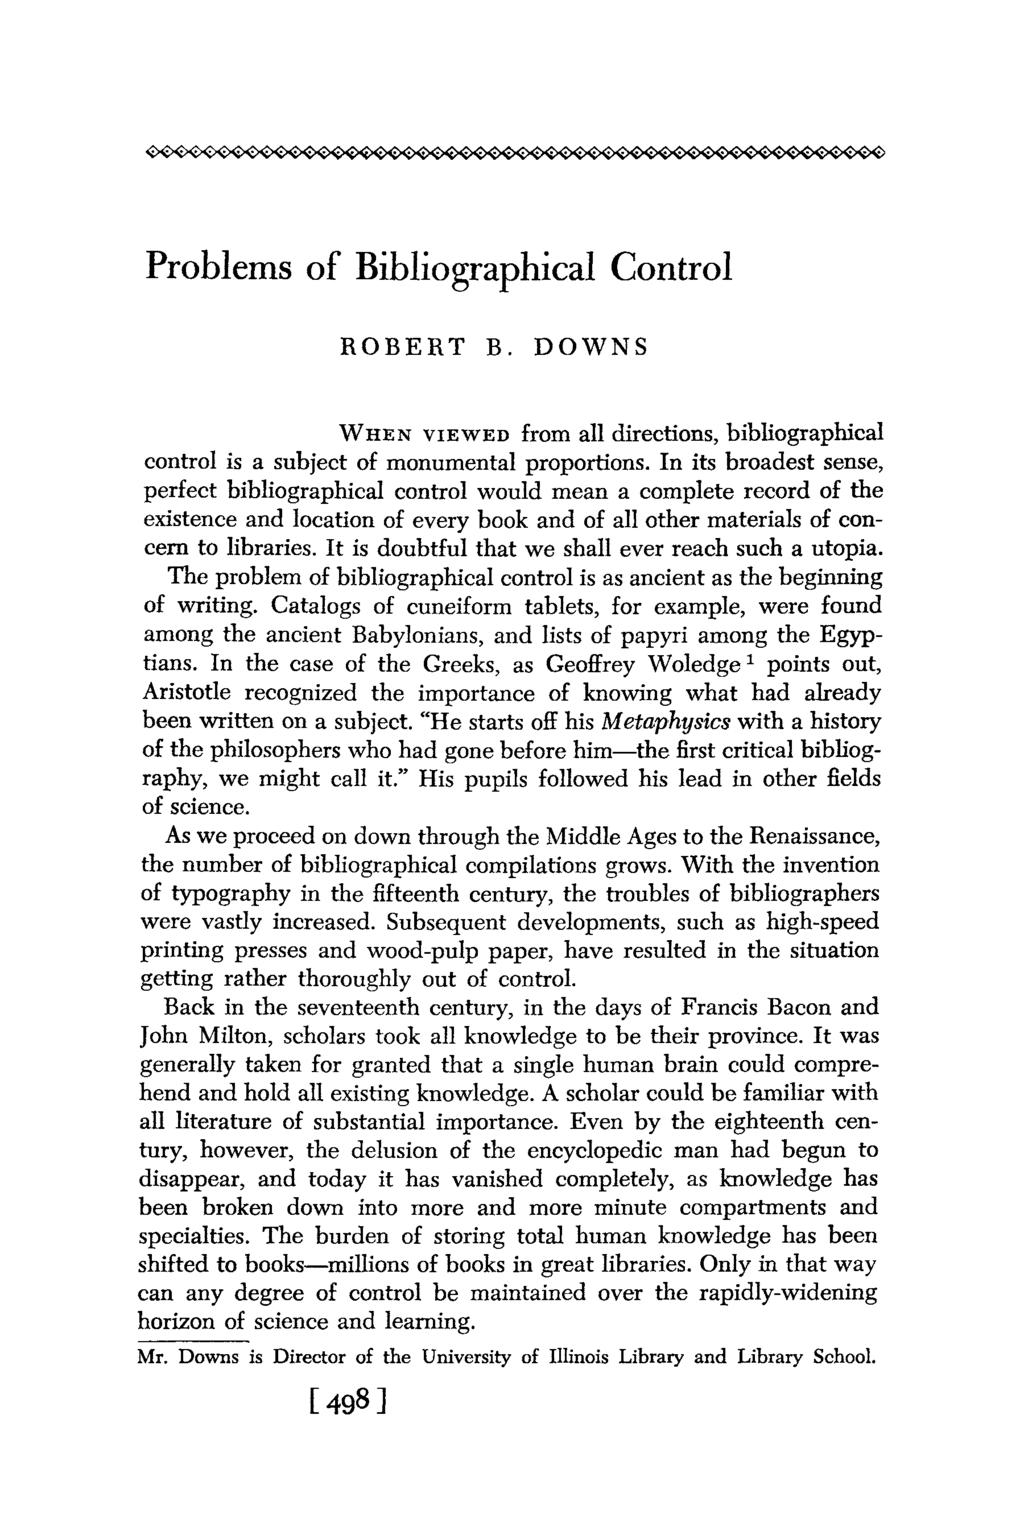 Problems of Bibliographical Control ROBERT B. DOWNS WHENVIE WED from all directions, bibliographical control is a subject of monumental proportions.